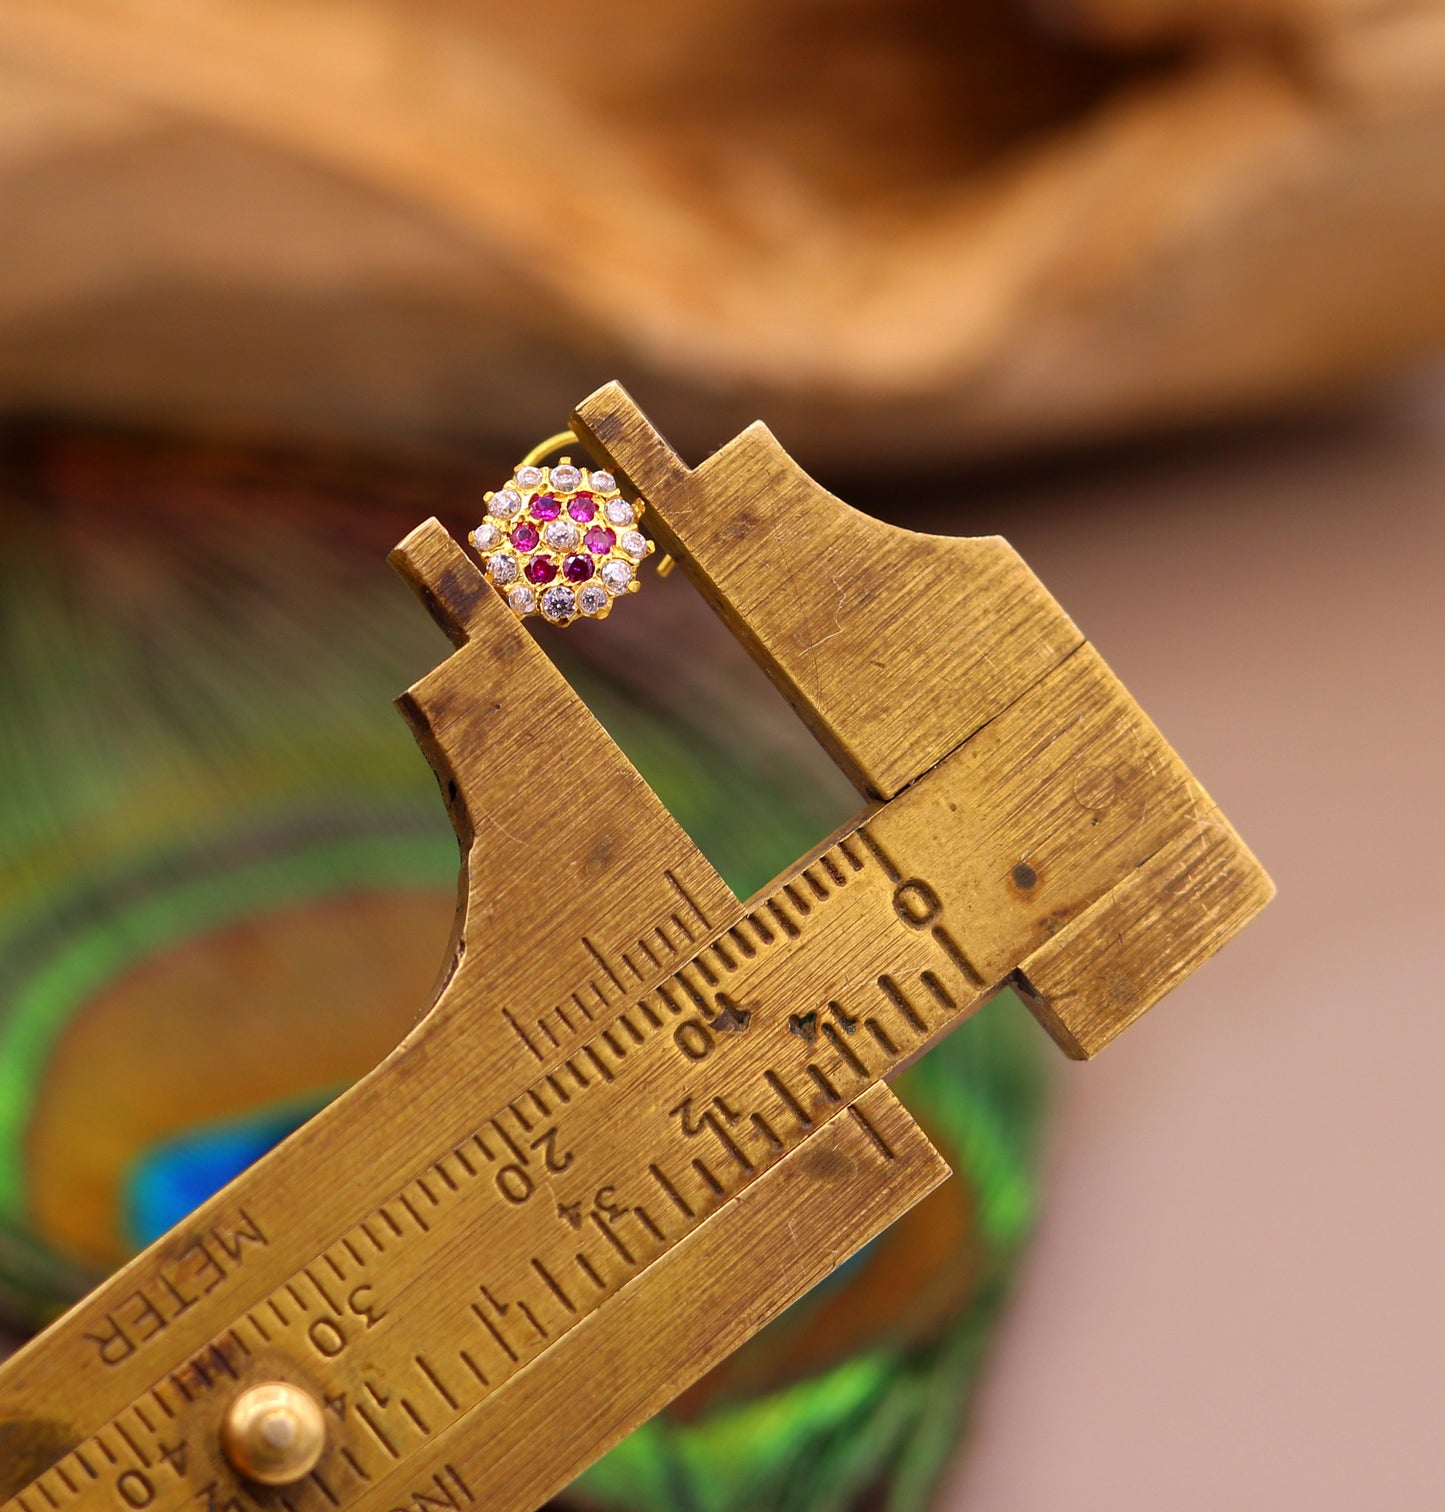 18kt yellow gold handmade fabulous pink color stone cubic zircon nose stud,excellent women girls daily use jewelry from Rajasthan gnp17 - TRIBAL ORNAMENTS